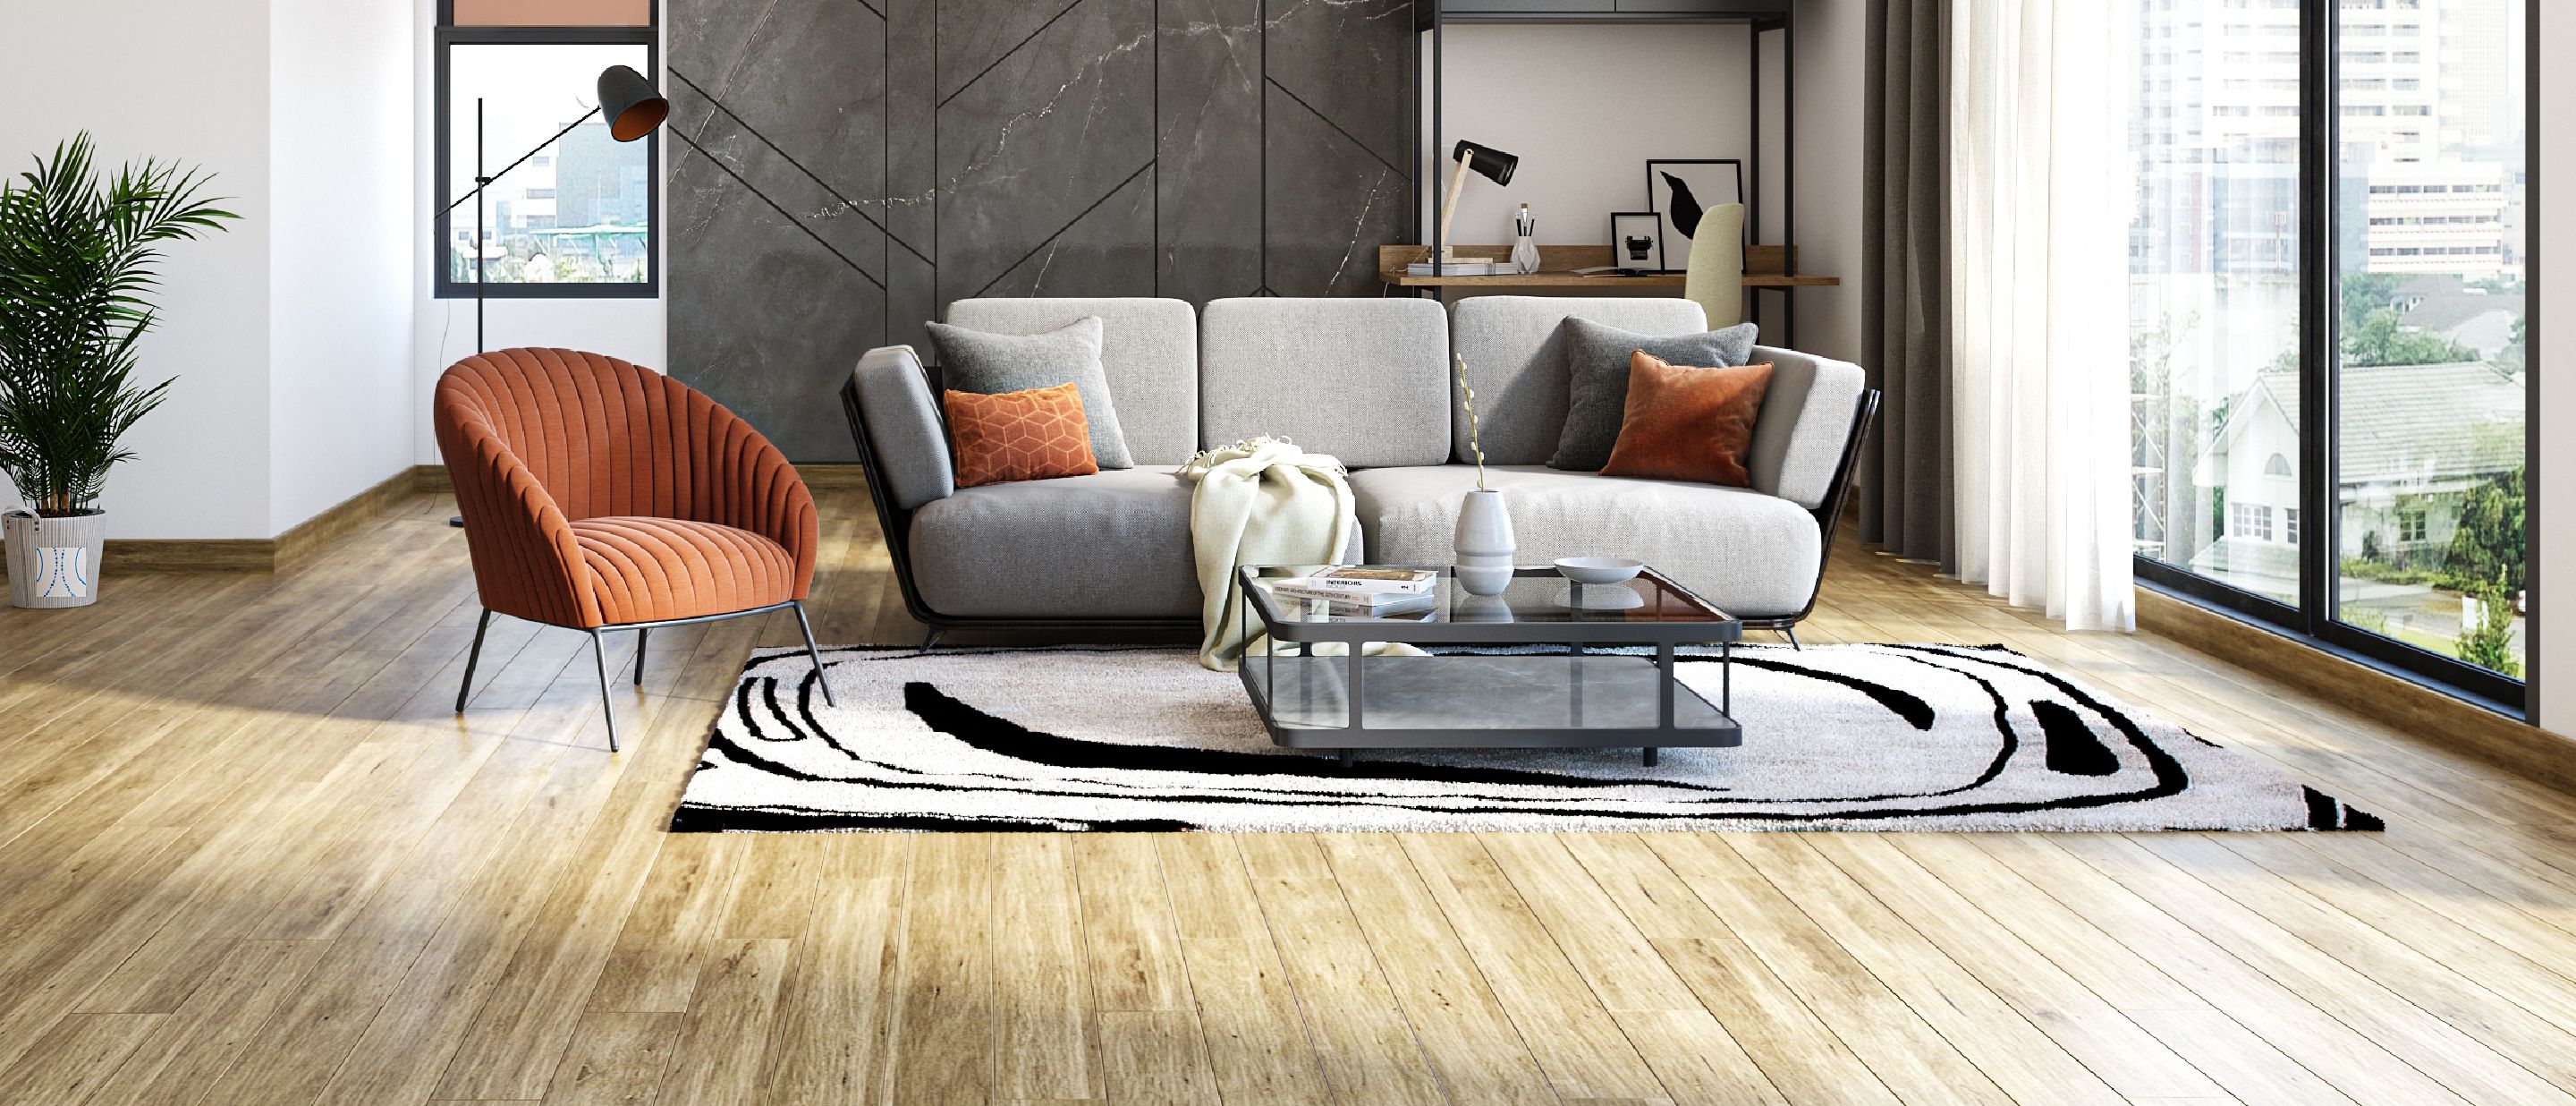 Asia’s largest home interiors brand is now in Malaysia